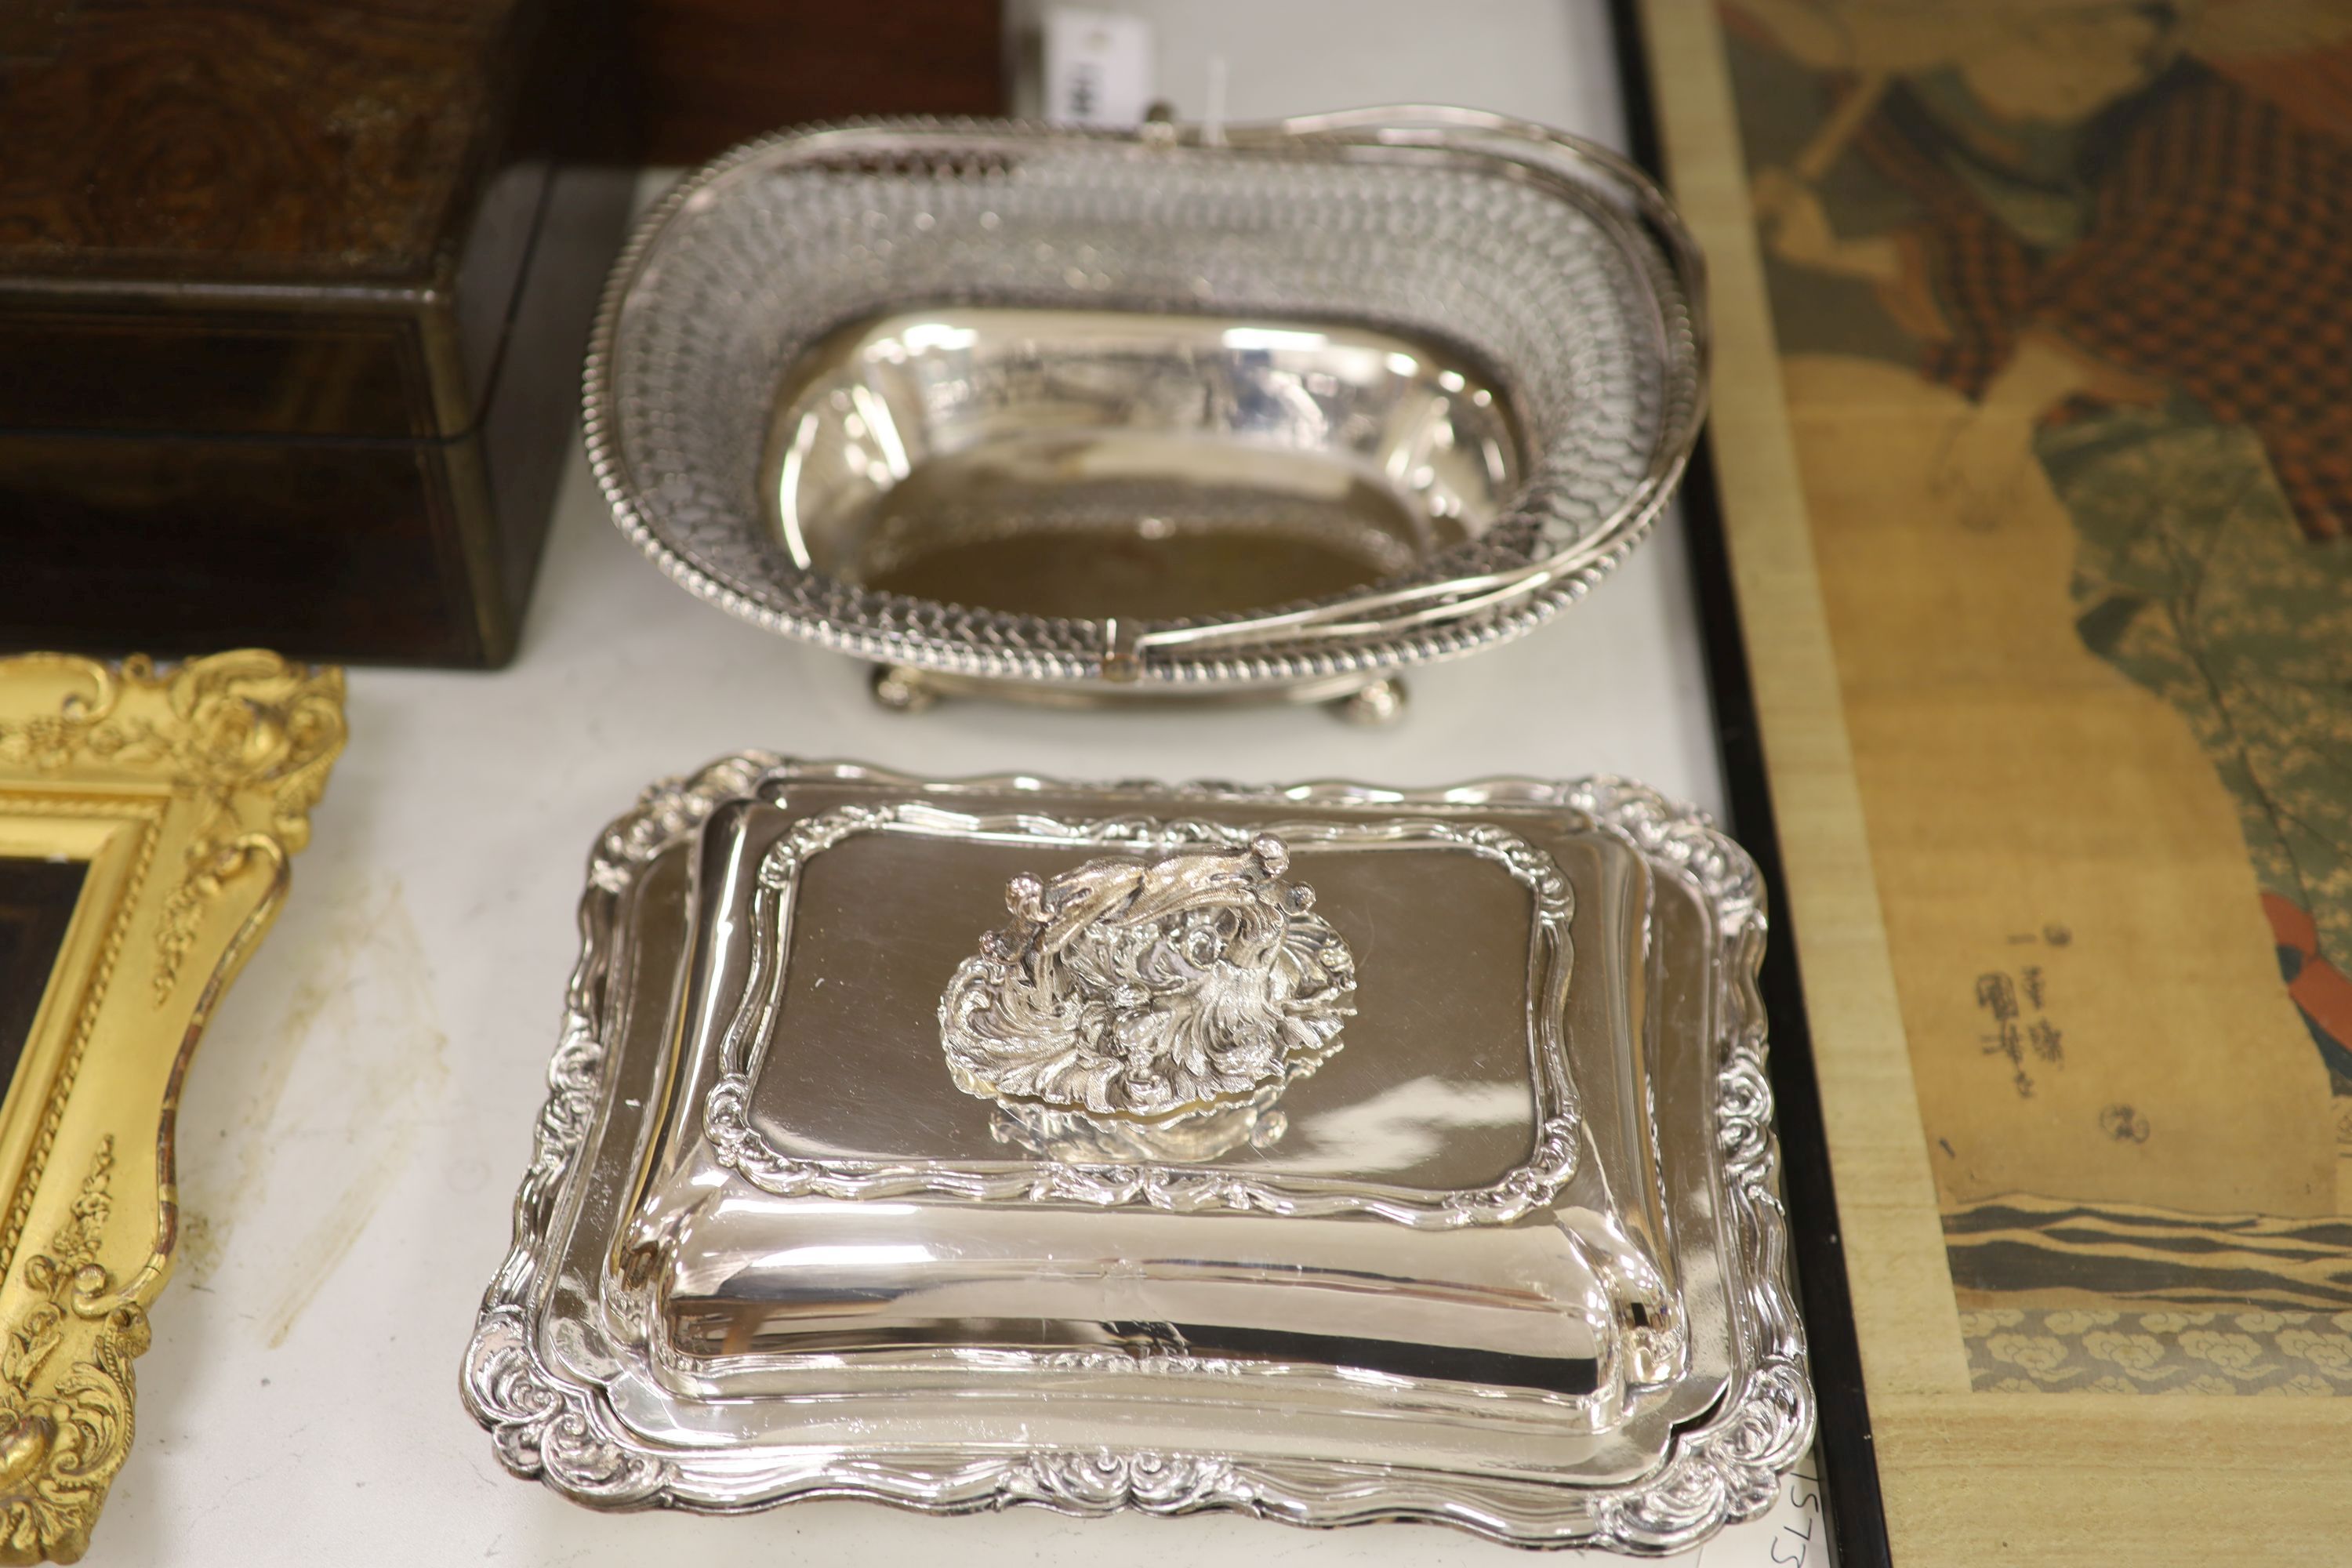 A 19th century Old Sheffield plate cake basket, an entree dish and cover, a pair of candlesticks and a wine cooler